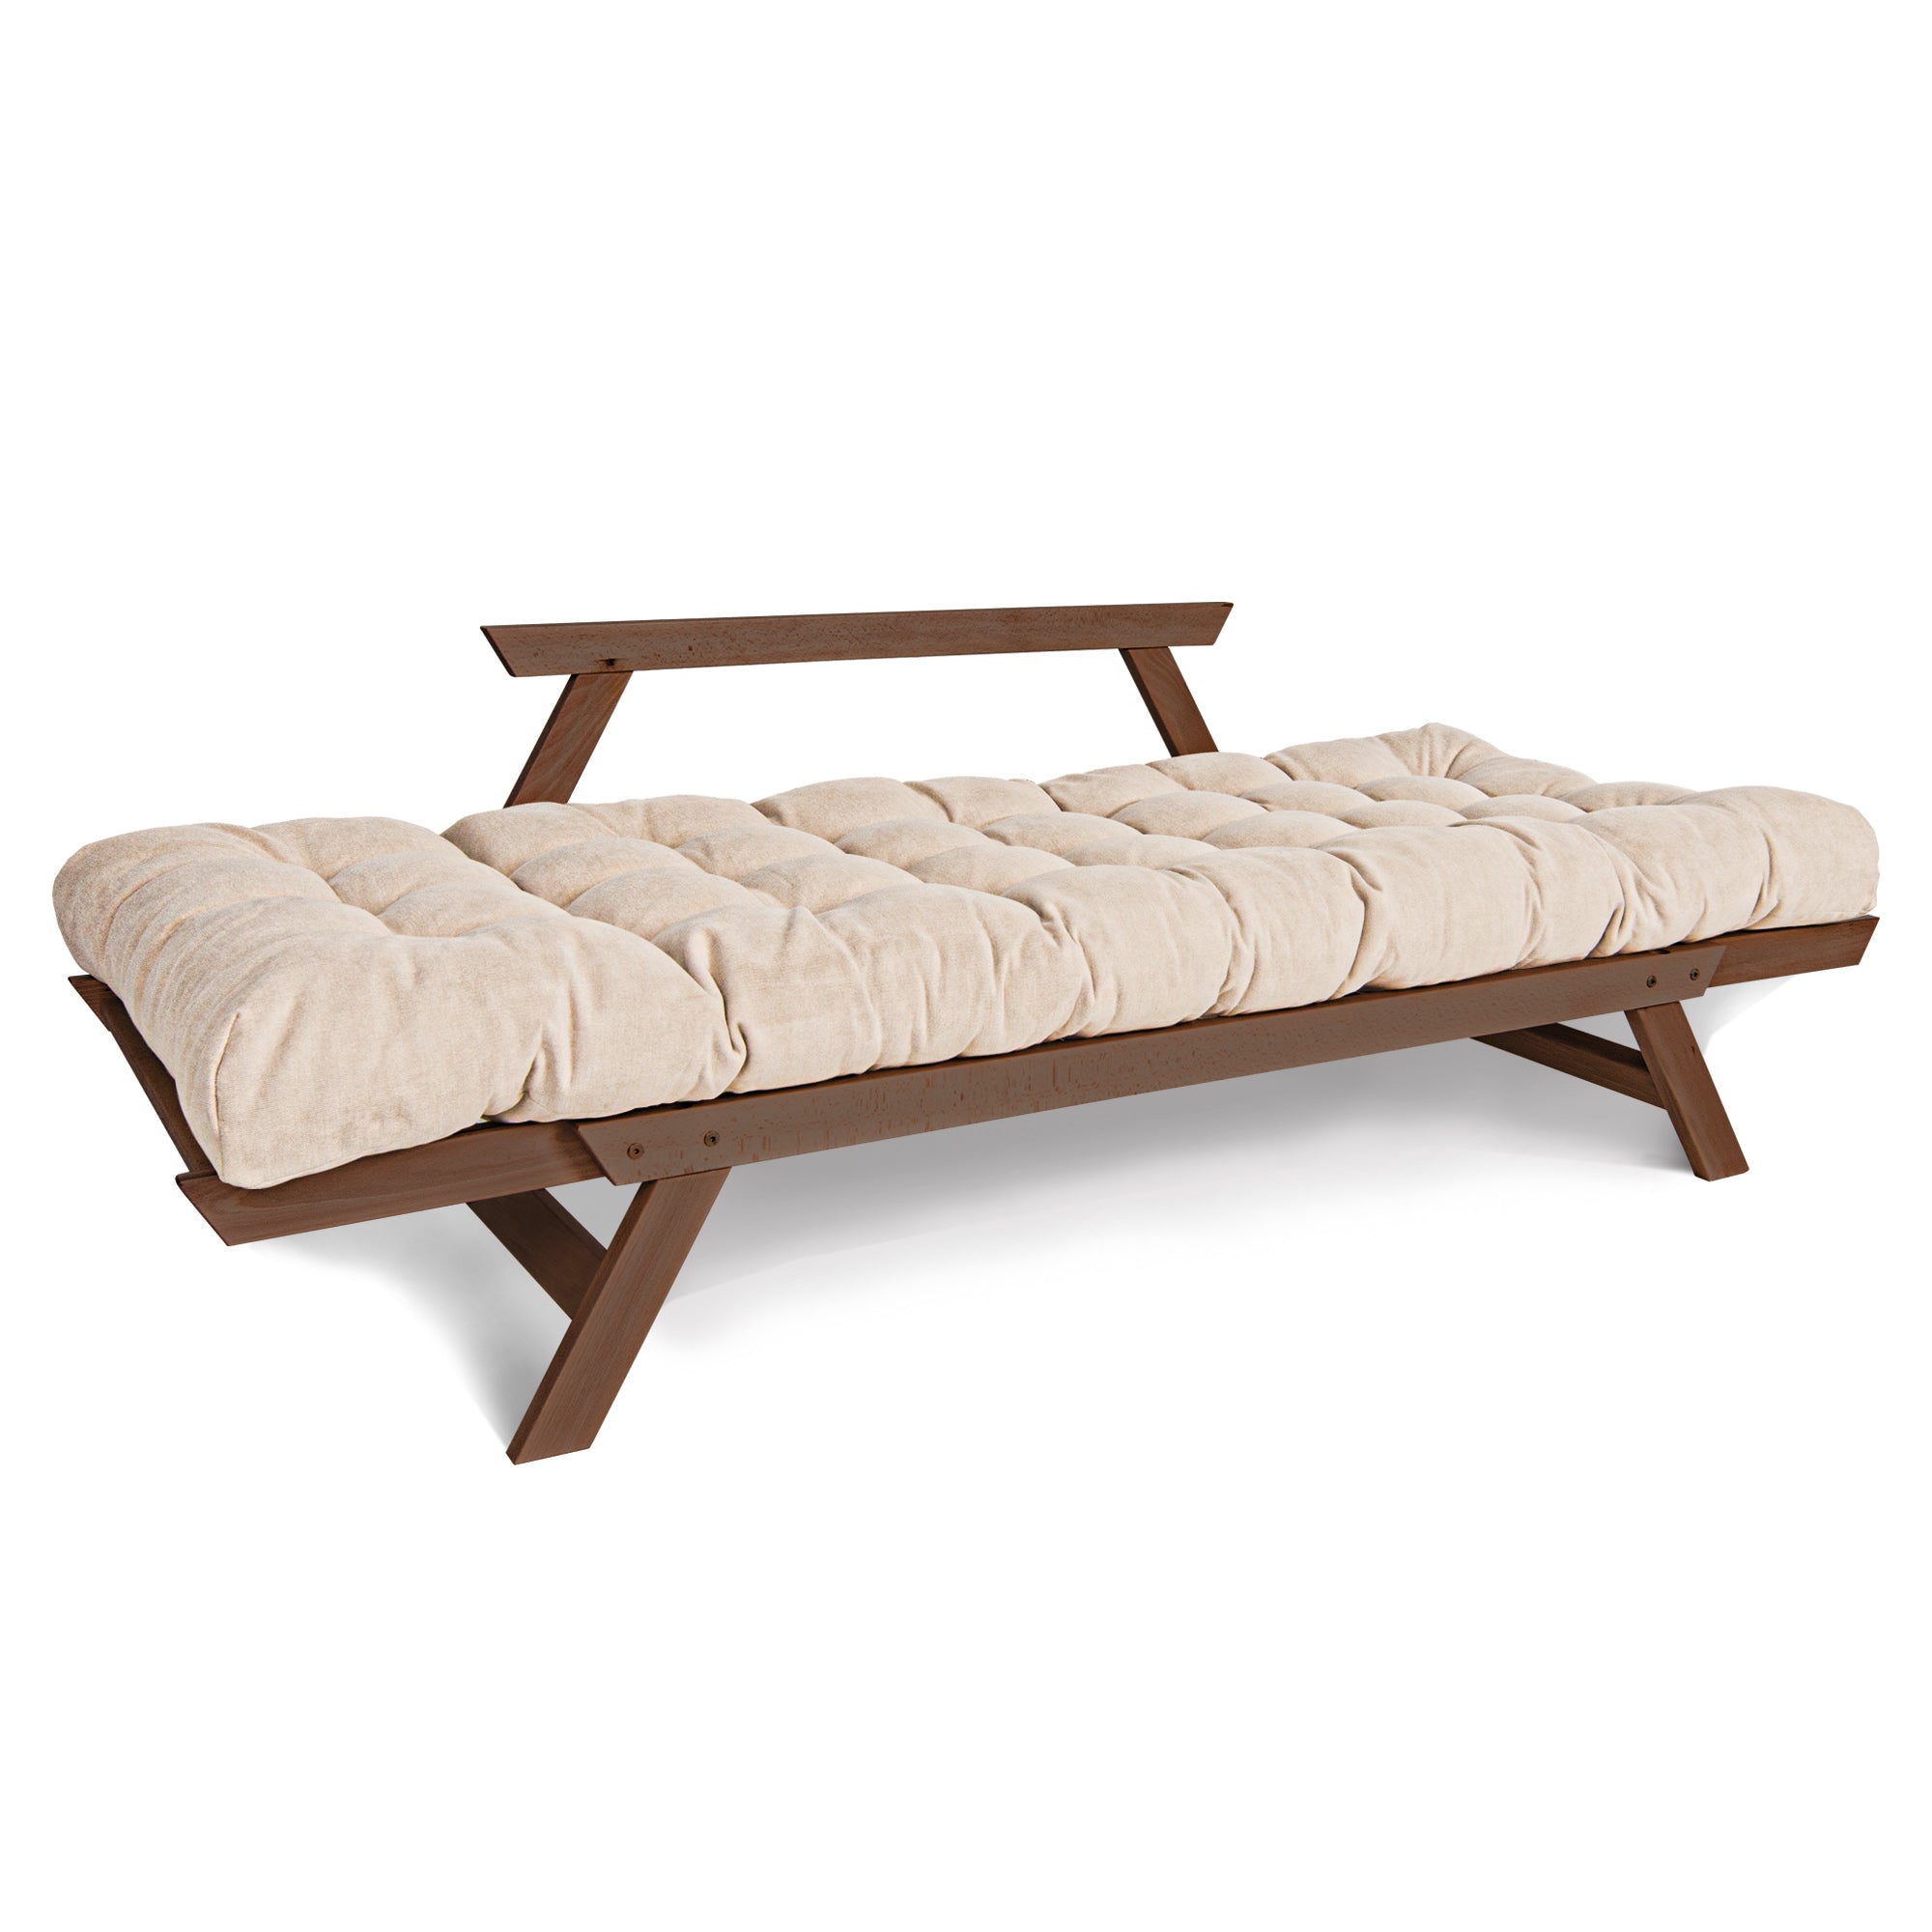 ALLEGRO Folding Futon Couch, Beech Wood Frame, Brown